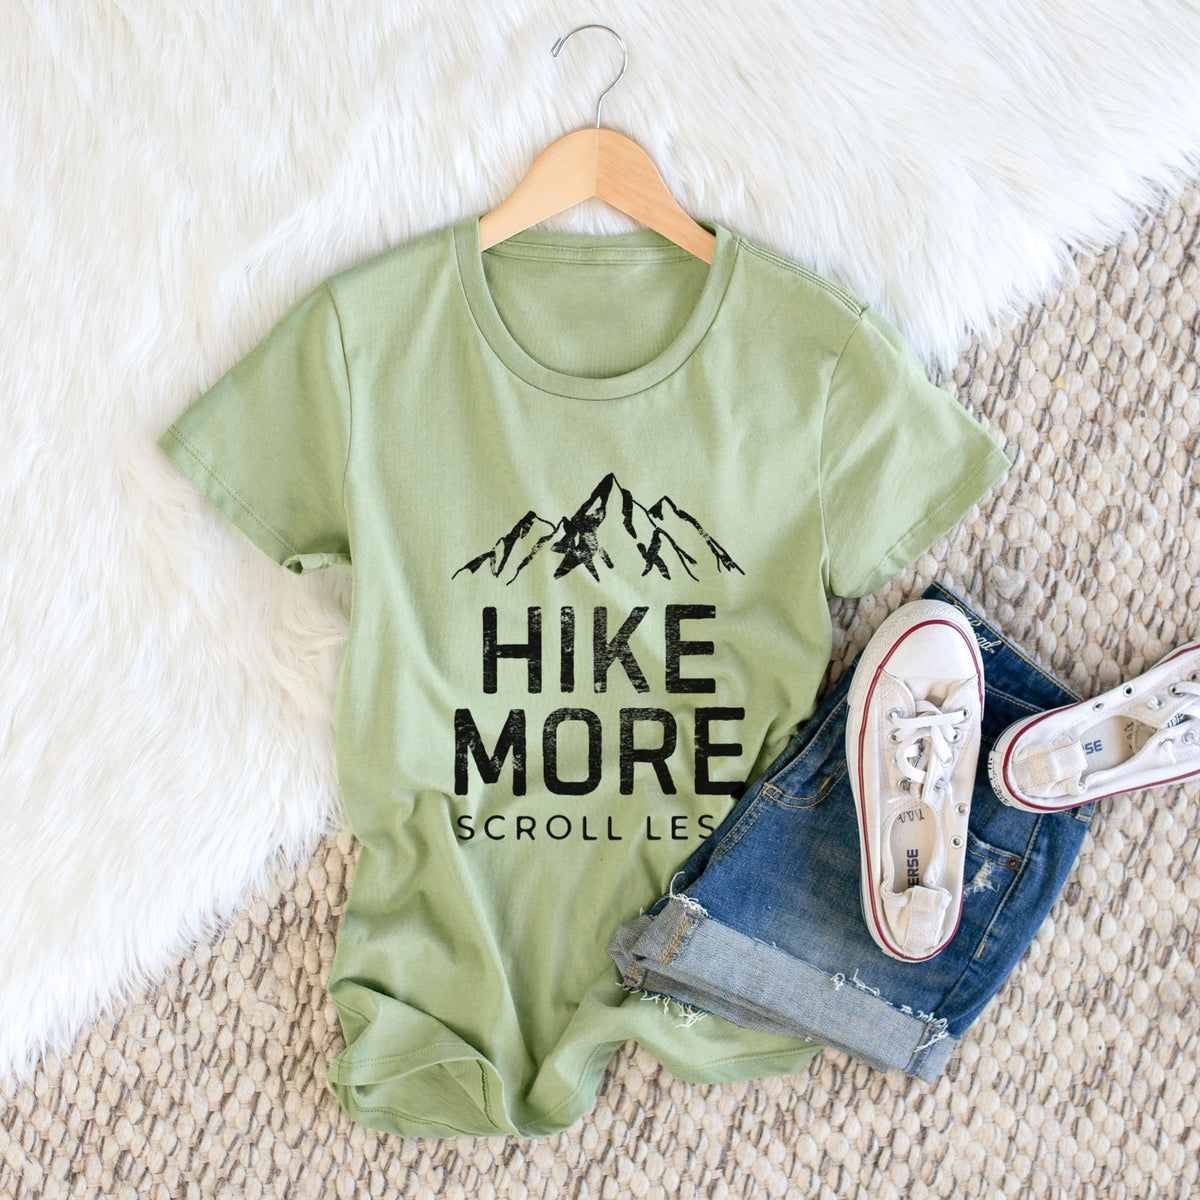 Hike More - Scroll Less - Women&#39;s Crewneck - Made in USA - 100% Organic Cotton